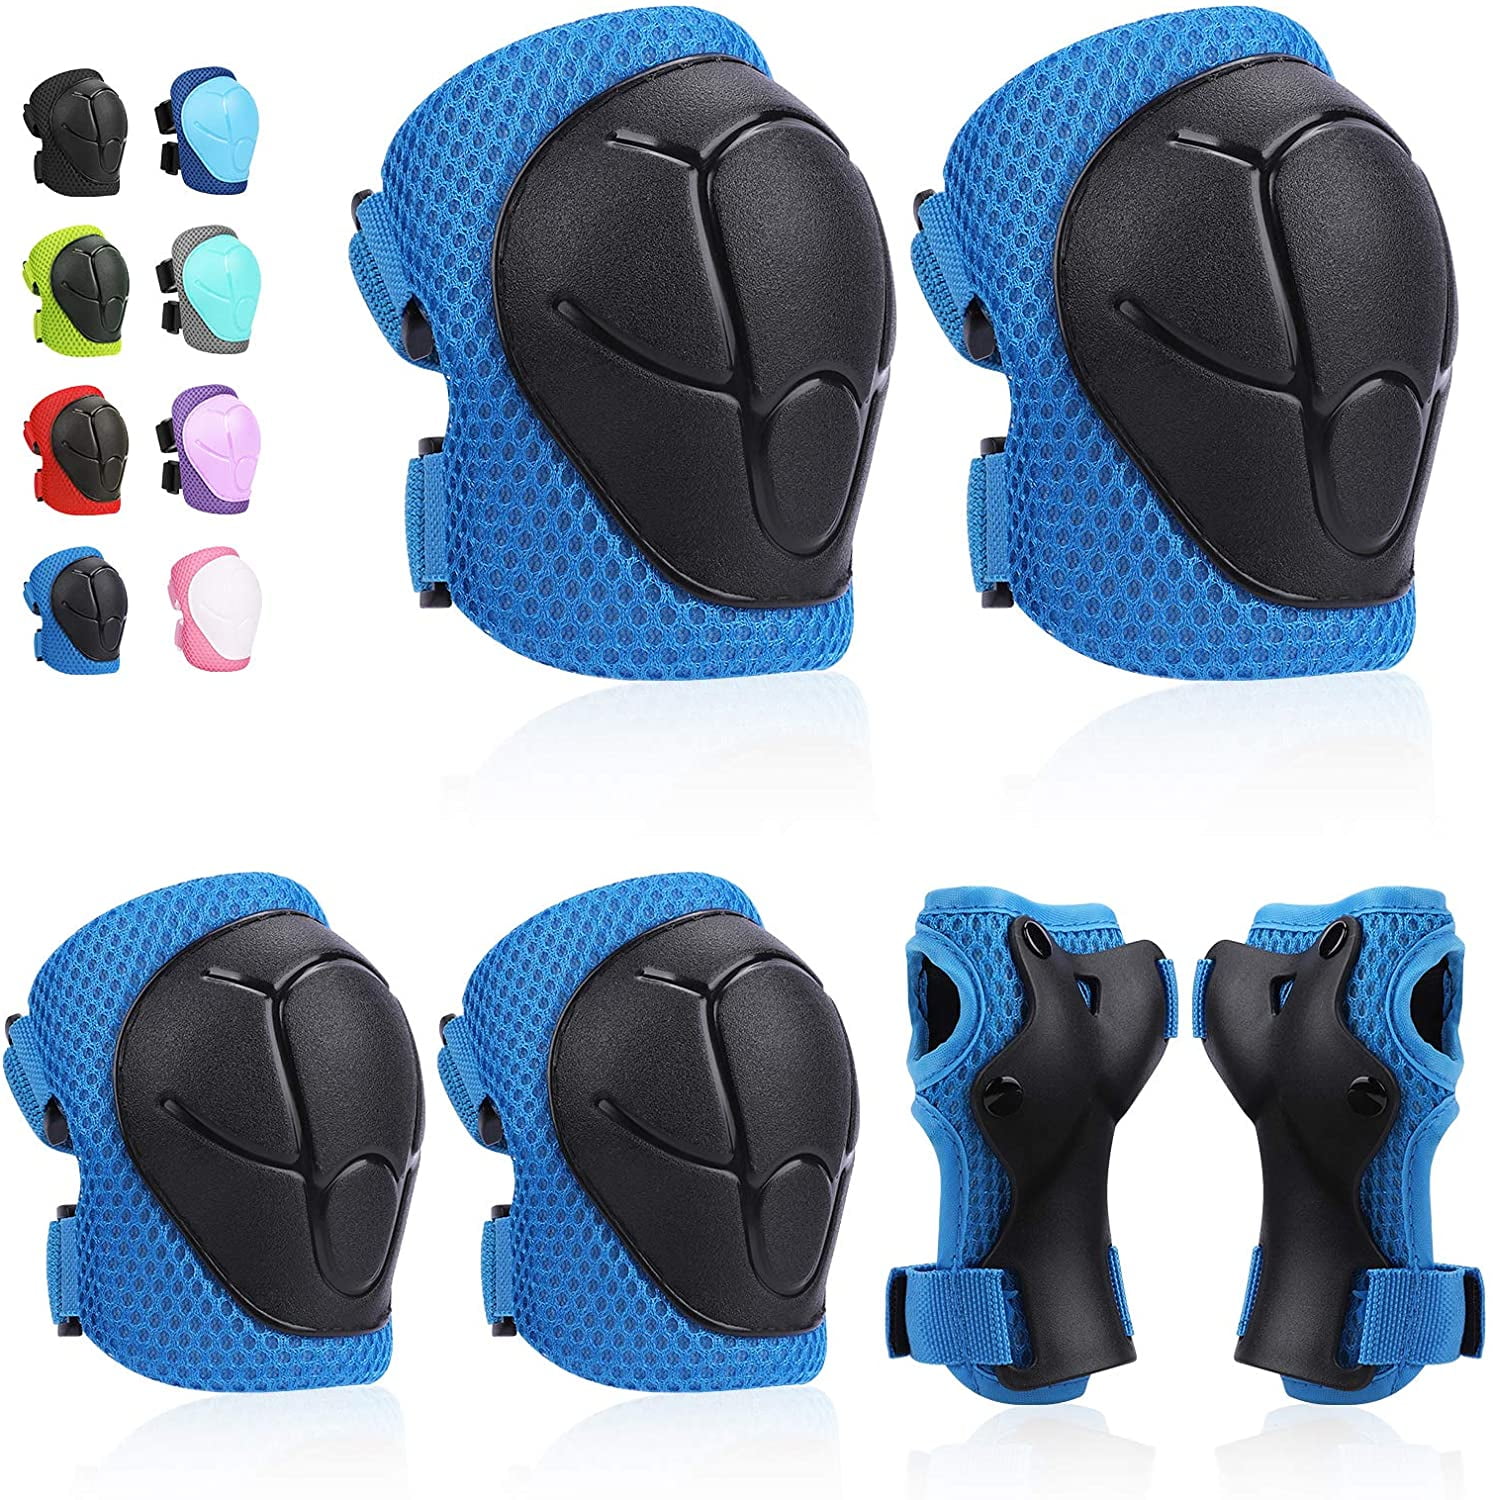 PROTECTIVE GEAR Set Knee Pads Elbow Pad Wrist Guards Bike Scooter Kids By S.K.L 